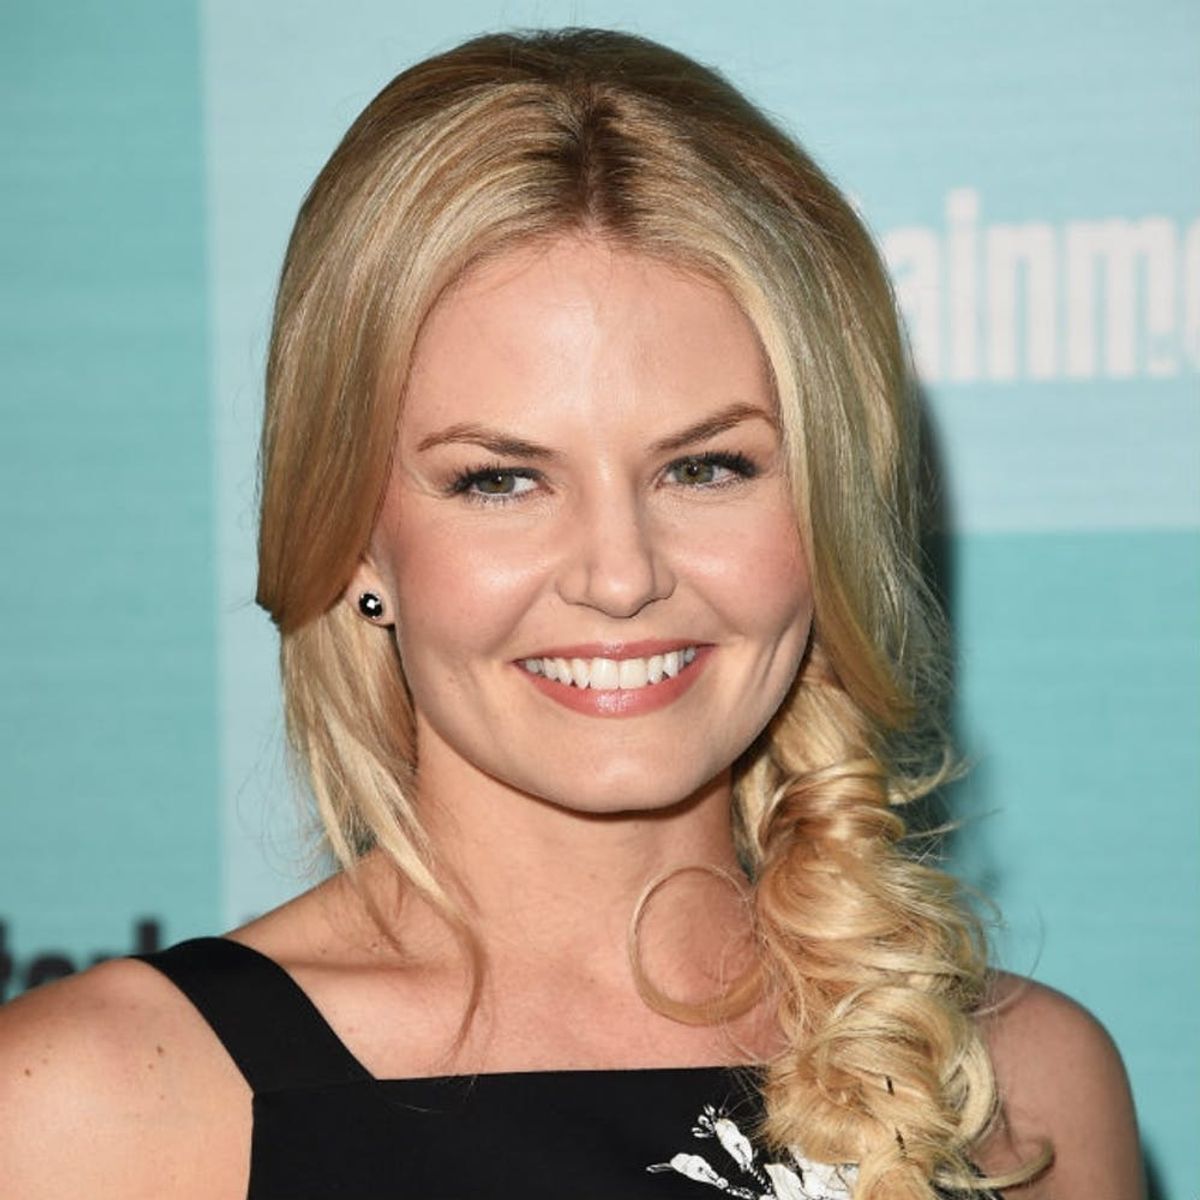 Jennifer Morrison’s FREE Solution for Managing Migraines Has Changed Her Life